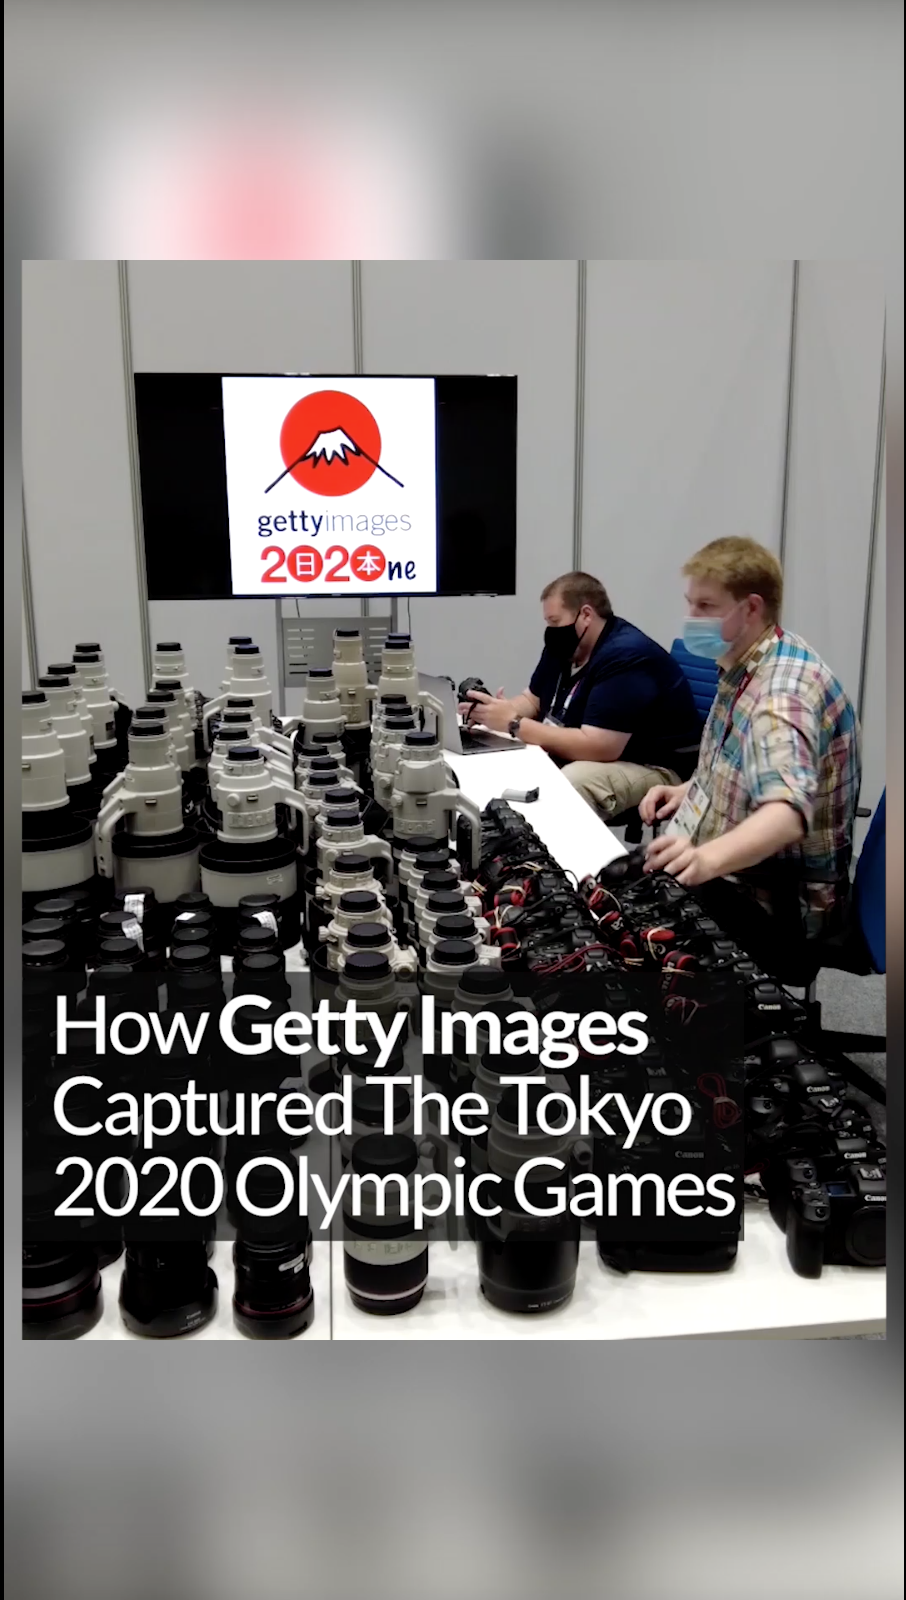 multimedia - How Getty Captured The 2020 Olympics